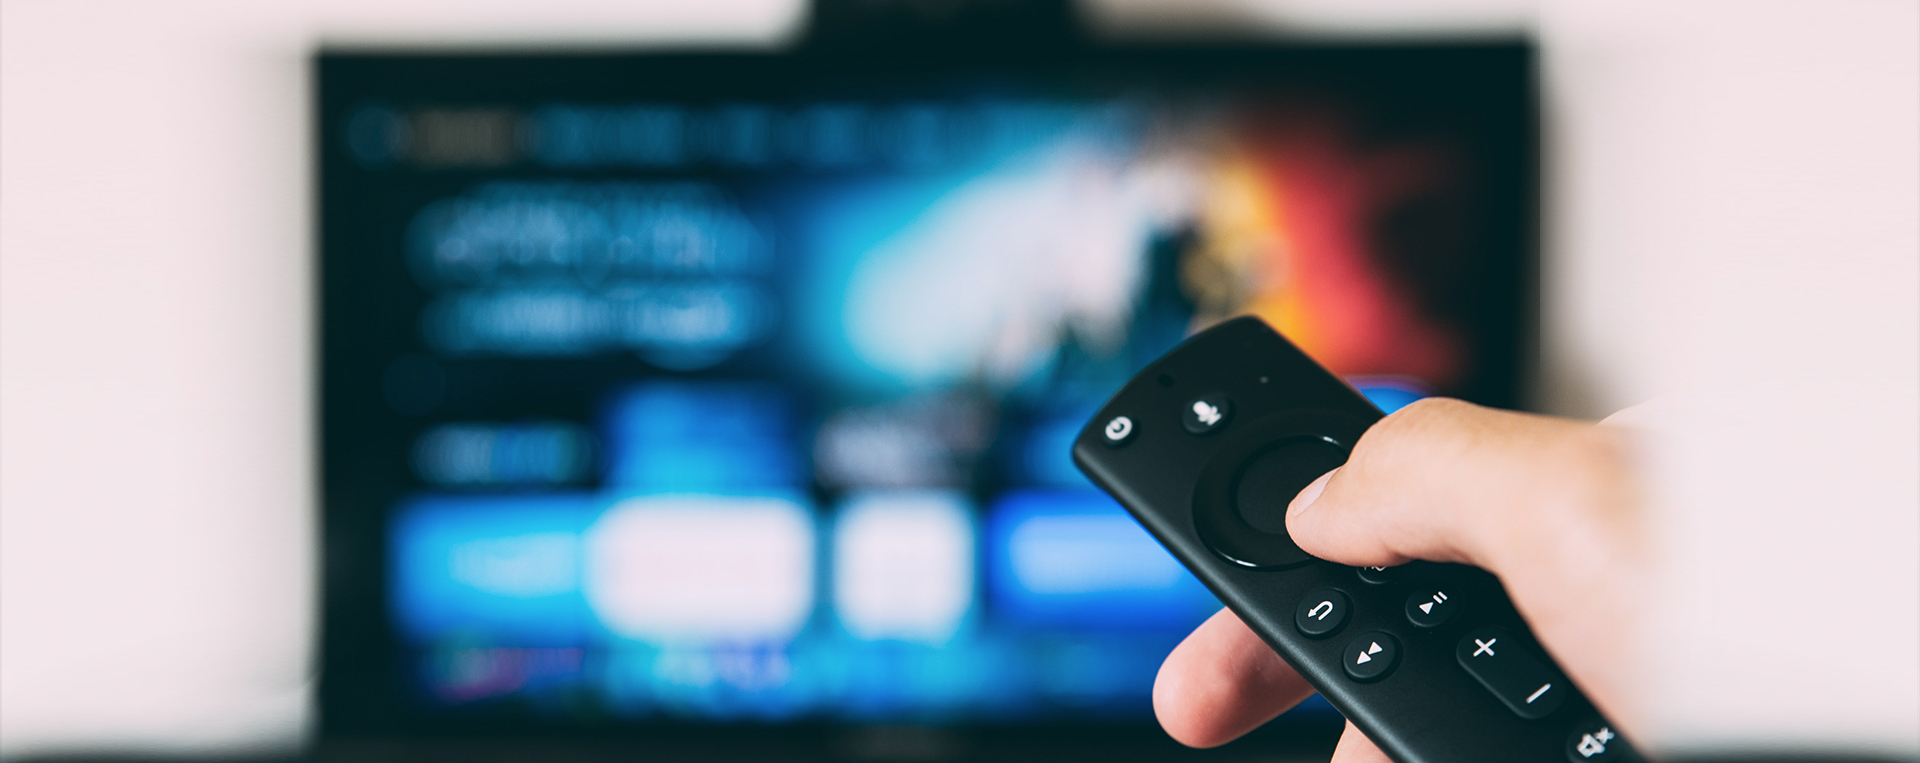 AVoD or SVoD? How to monetize your digital platform